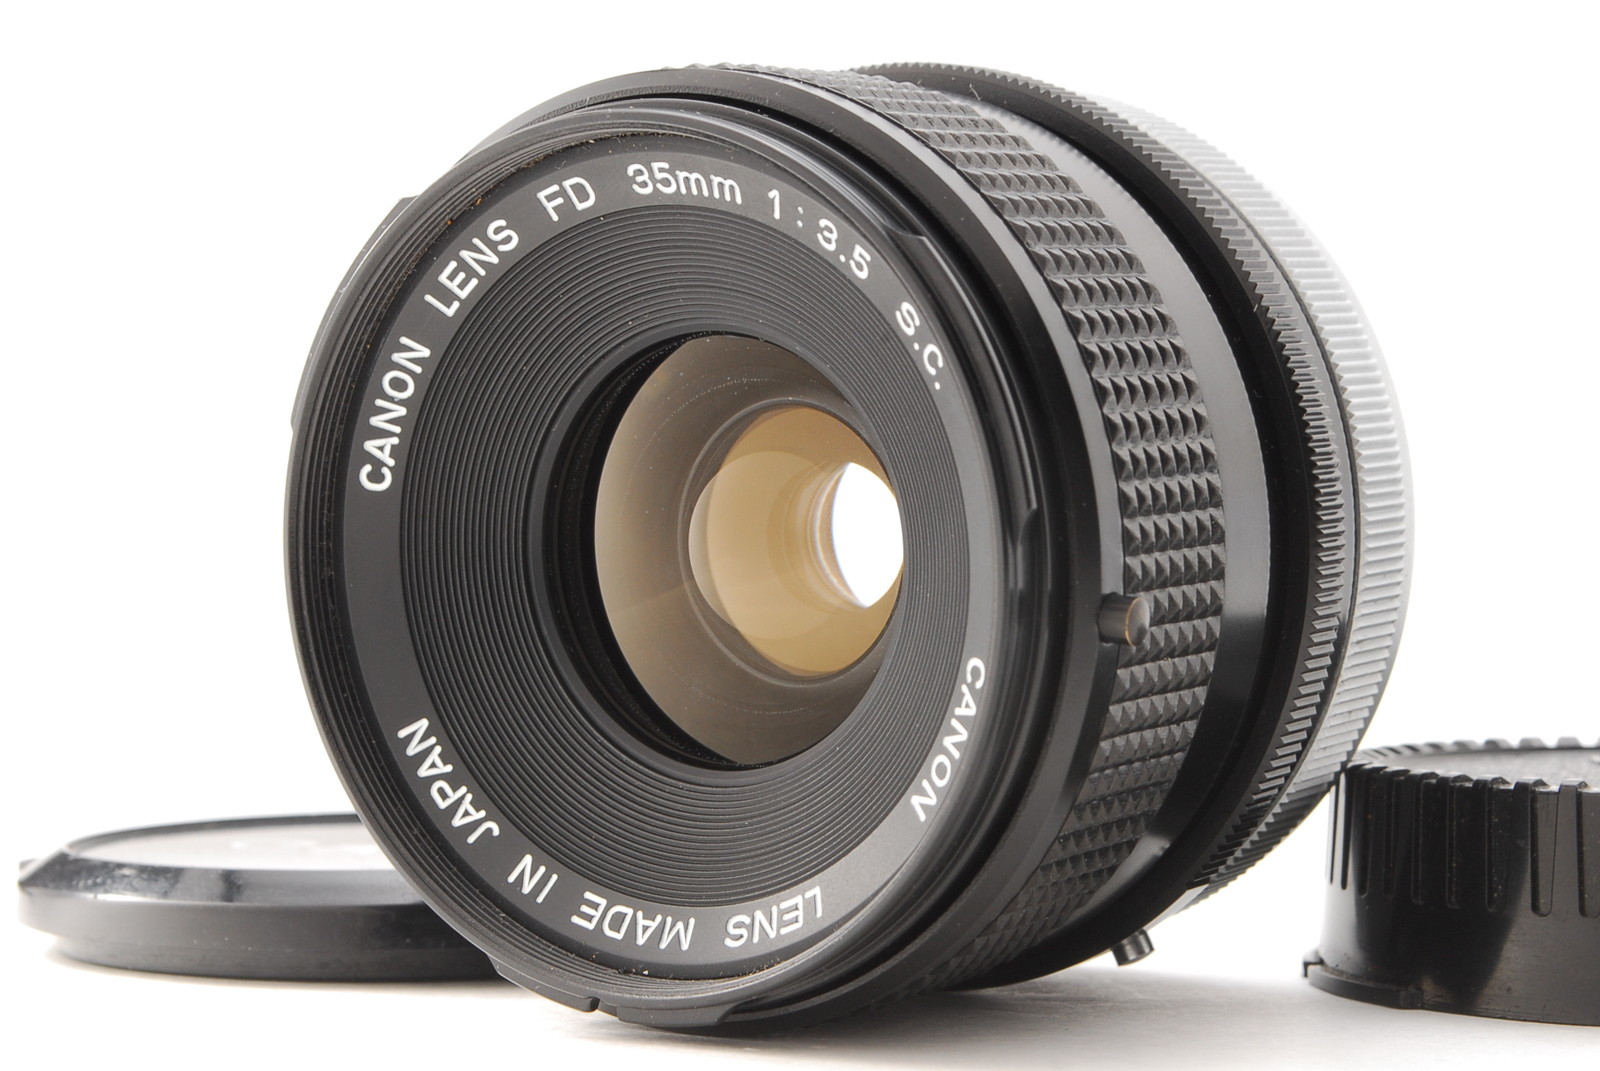 PROMOTION. EXC++++ Canon FD 35mm f/3.5 S.C. SC, Front Cap, Rear Cap from Japan